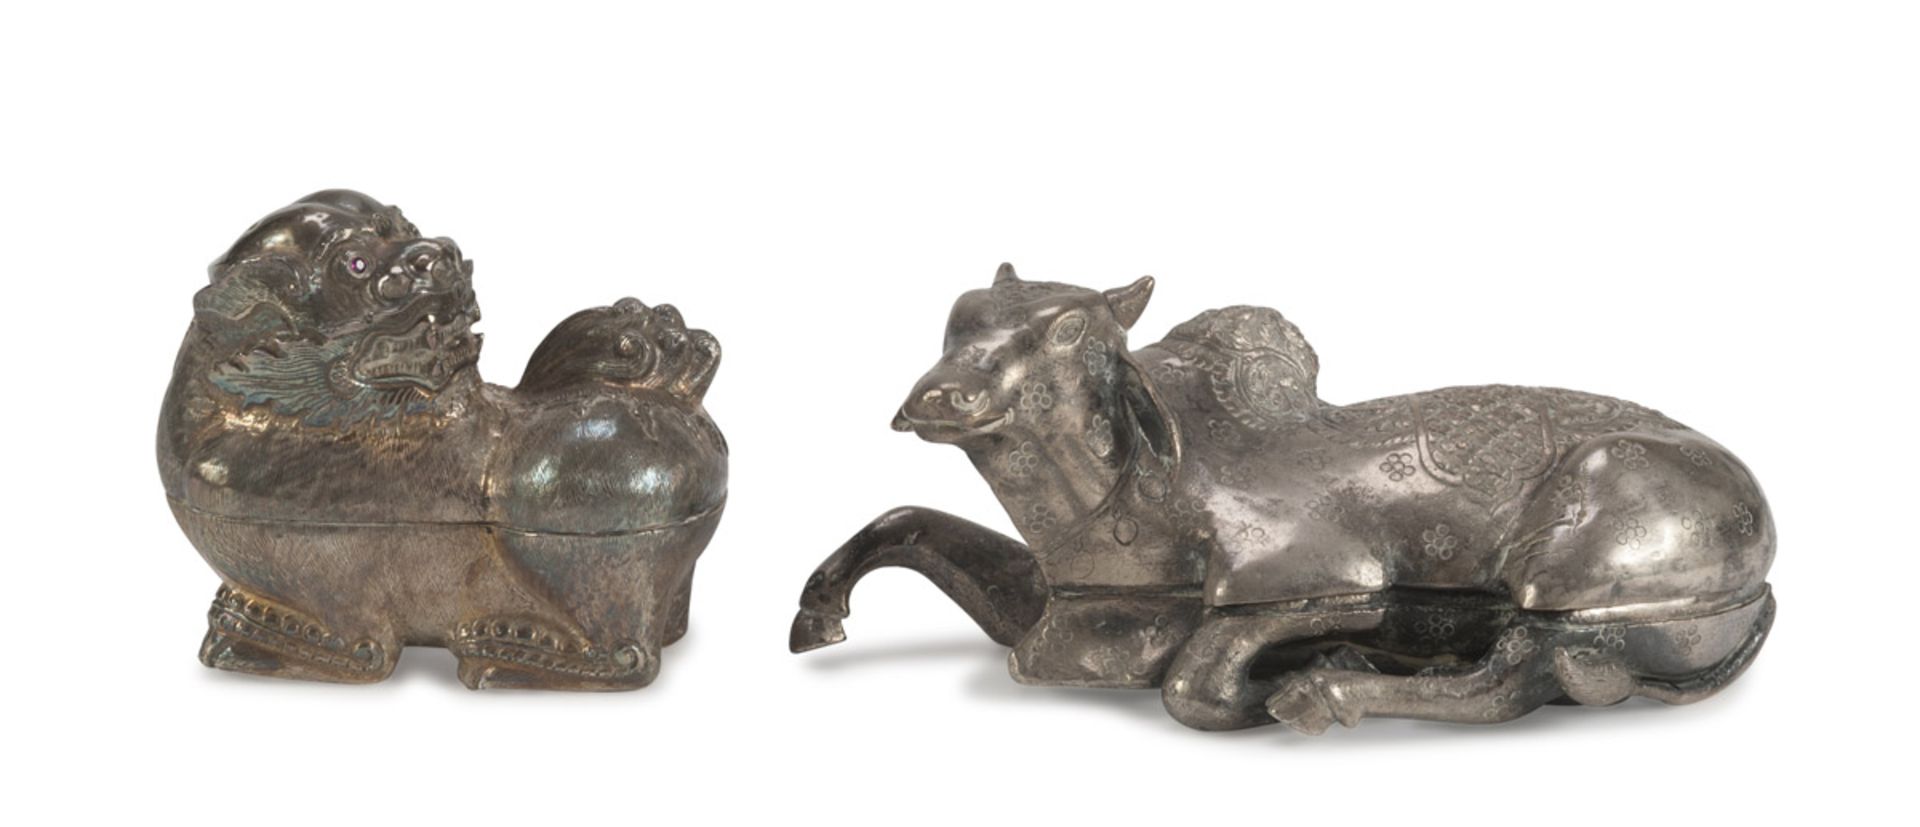 TWO CHINESE METAL BOXES, 20TH CENTURY representing a Buddhist lion and a buffalo. Maximum size cm. 7